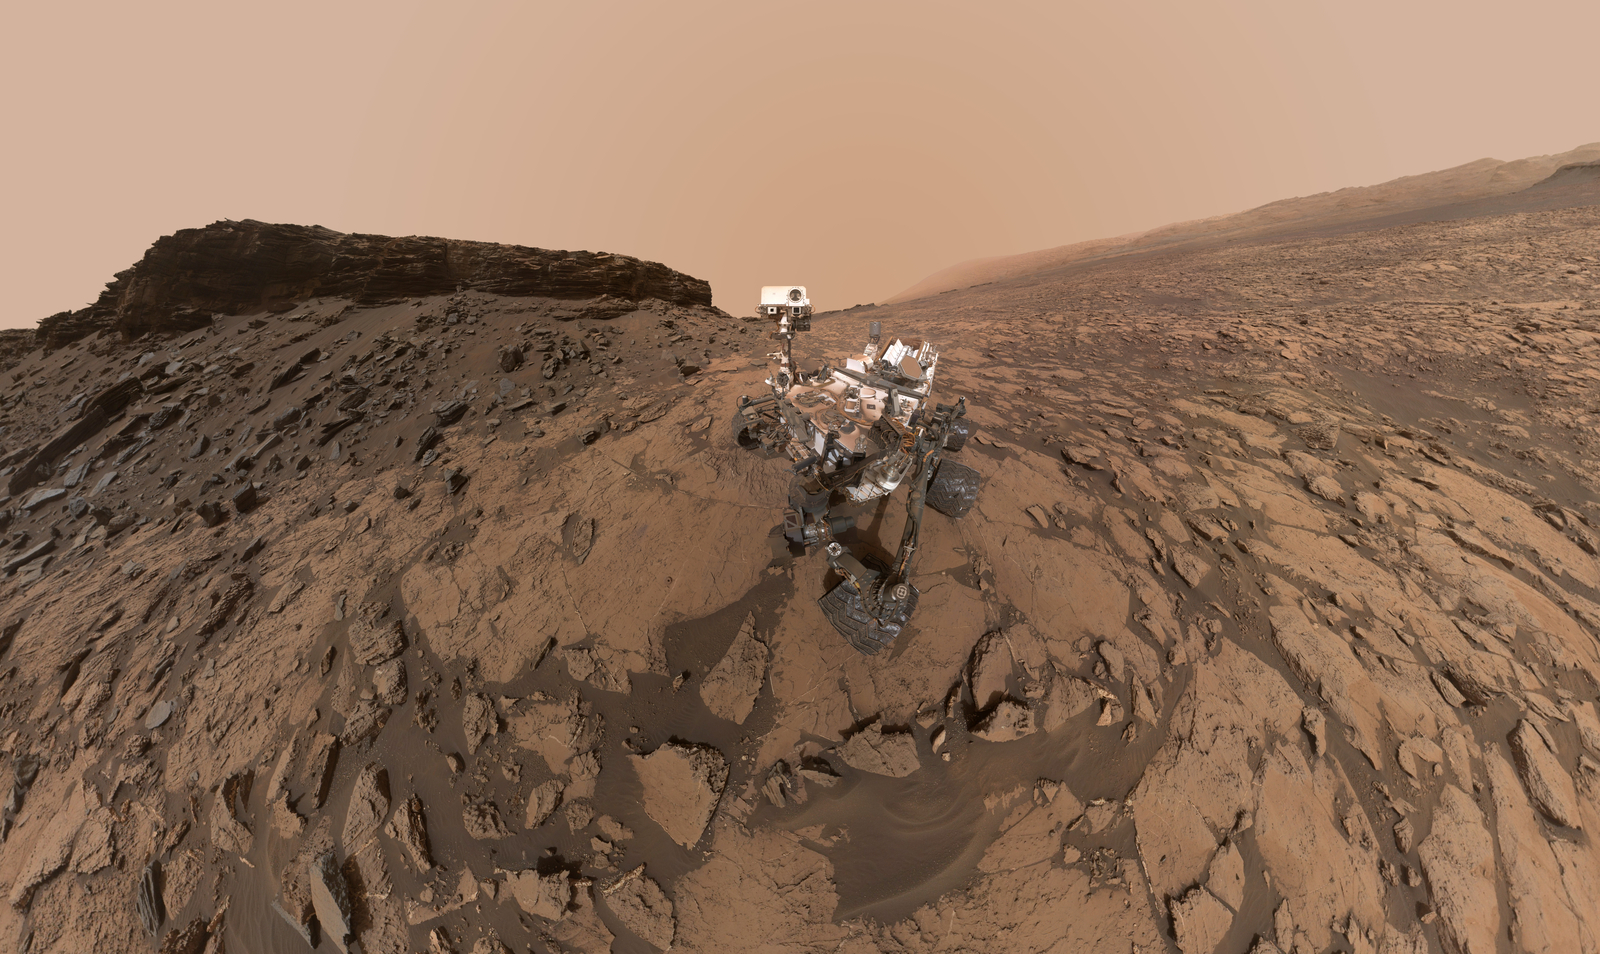 This September 2016 self-portrait of NASA's Curiosity Mars rover shows the vehicle at the "Quela" drilling location in the scenic "Murray Buttes" area on lower Mount Sharp. The panorama was stitched together from multiple images taken by the MAHLI camera at the end of the rover's arm.